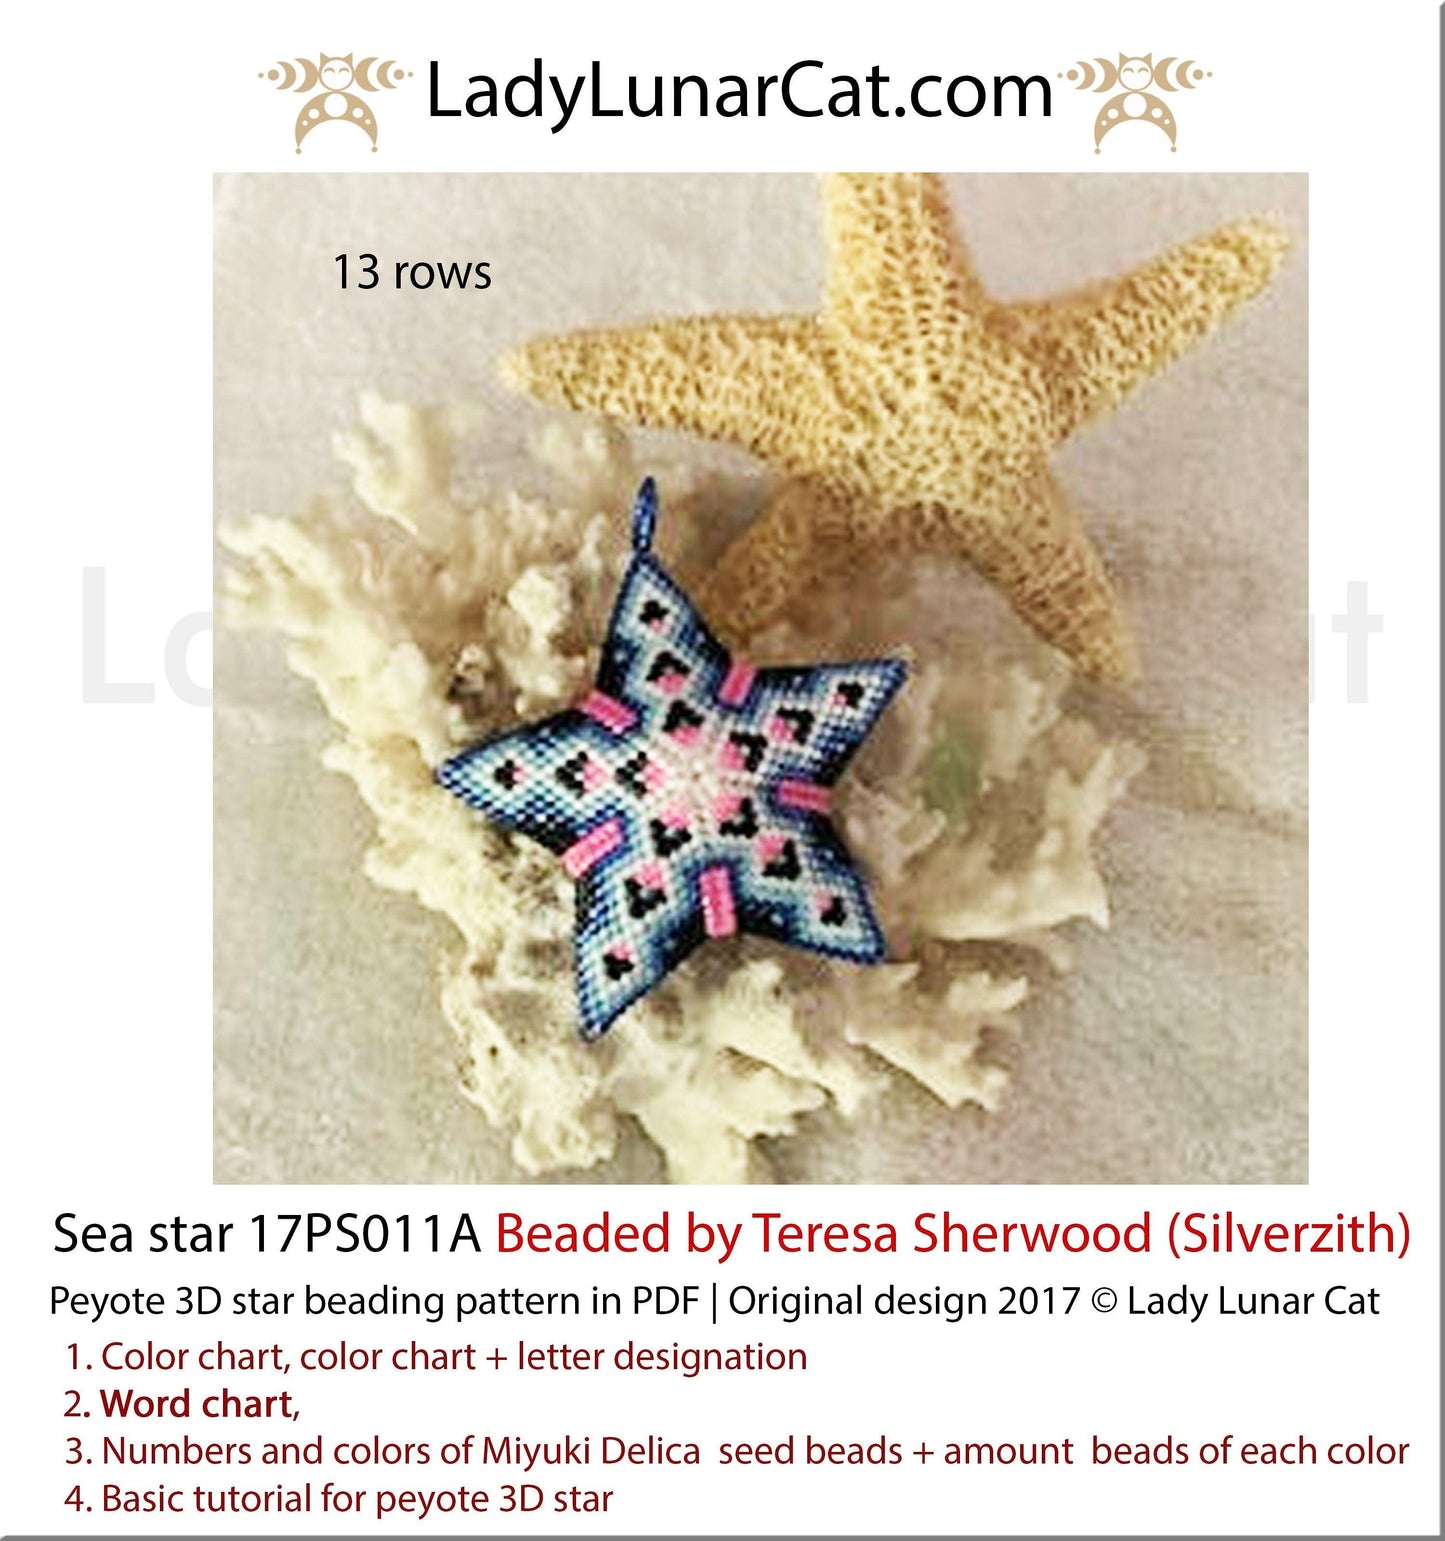 3d peyote star patterns for beading Sea star 17PS011A LadyLunarCat